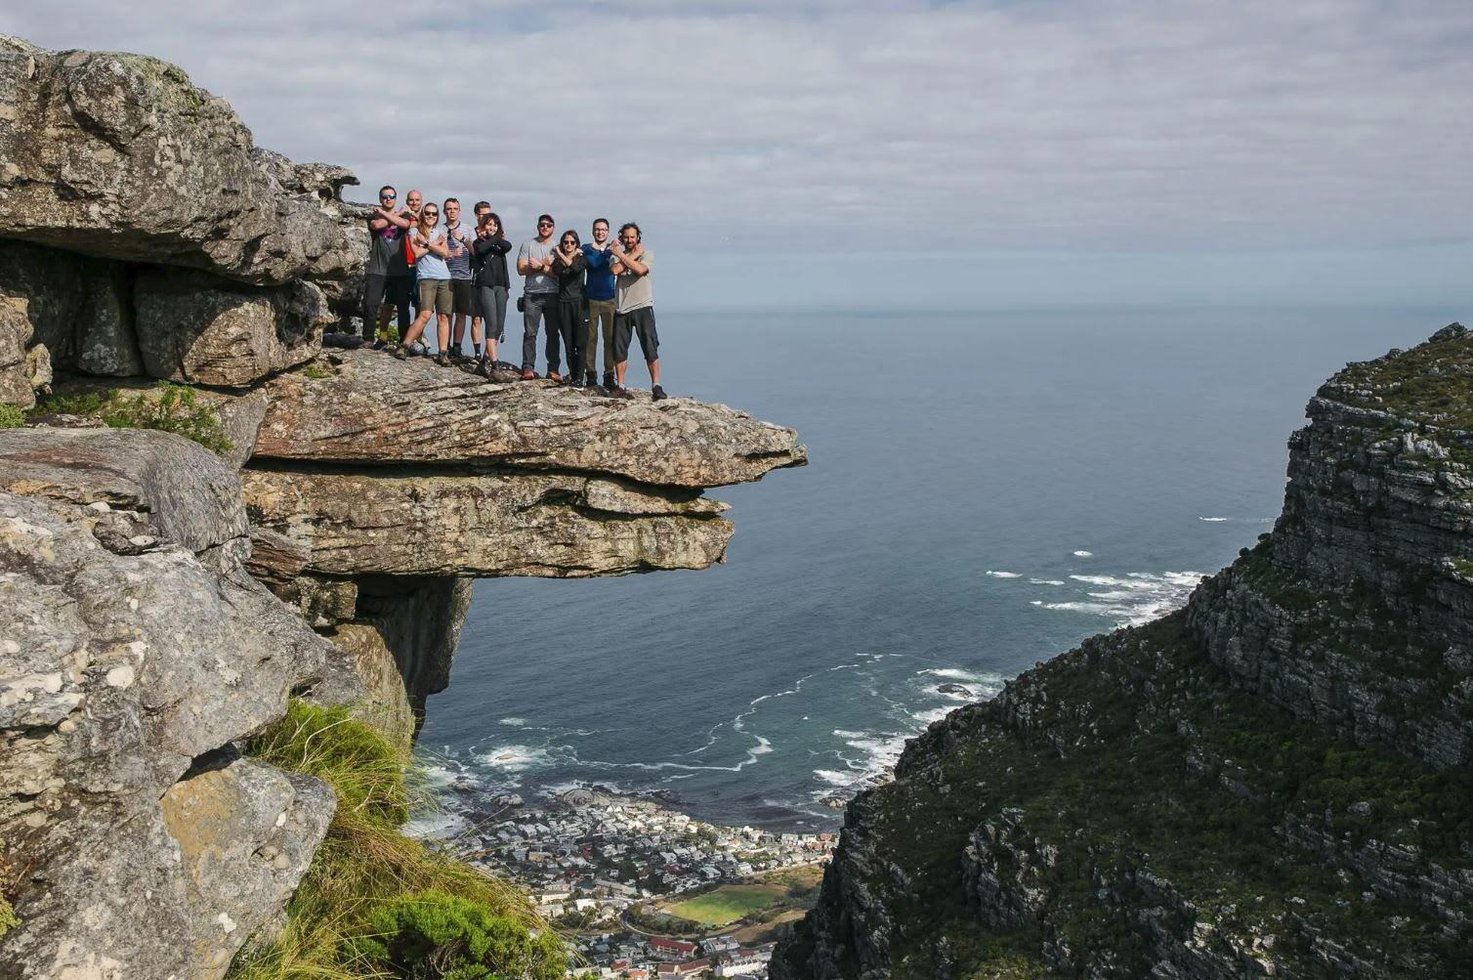 Exploring South Africa: Table Mountain, Dassies, and a Blister Bush image